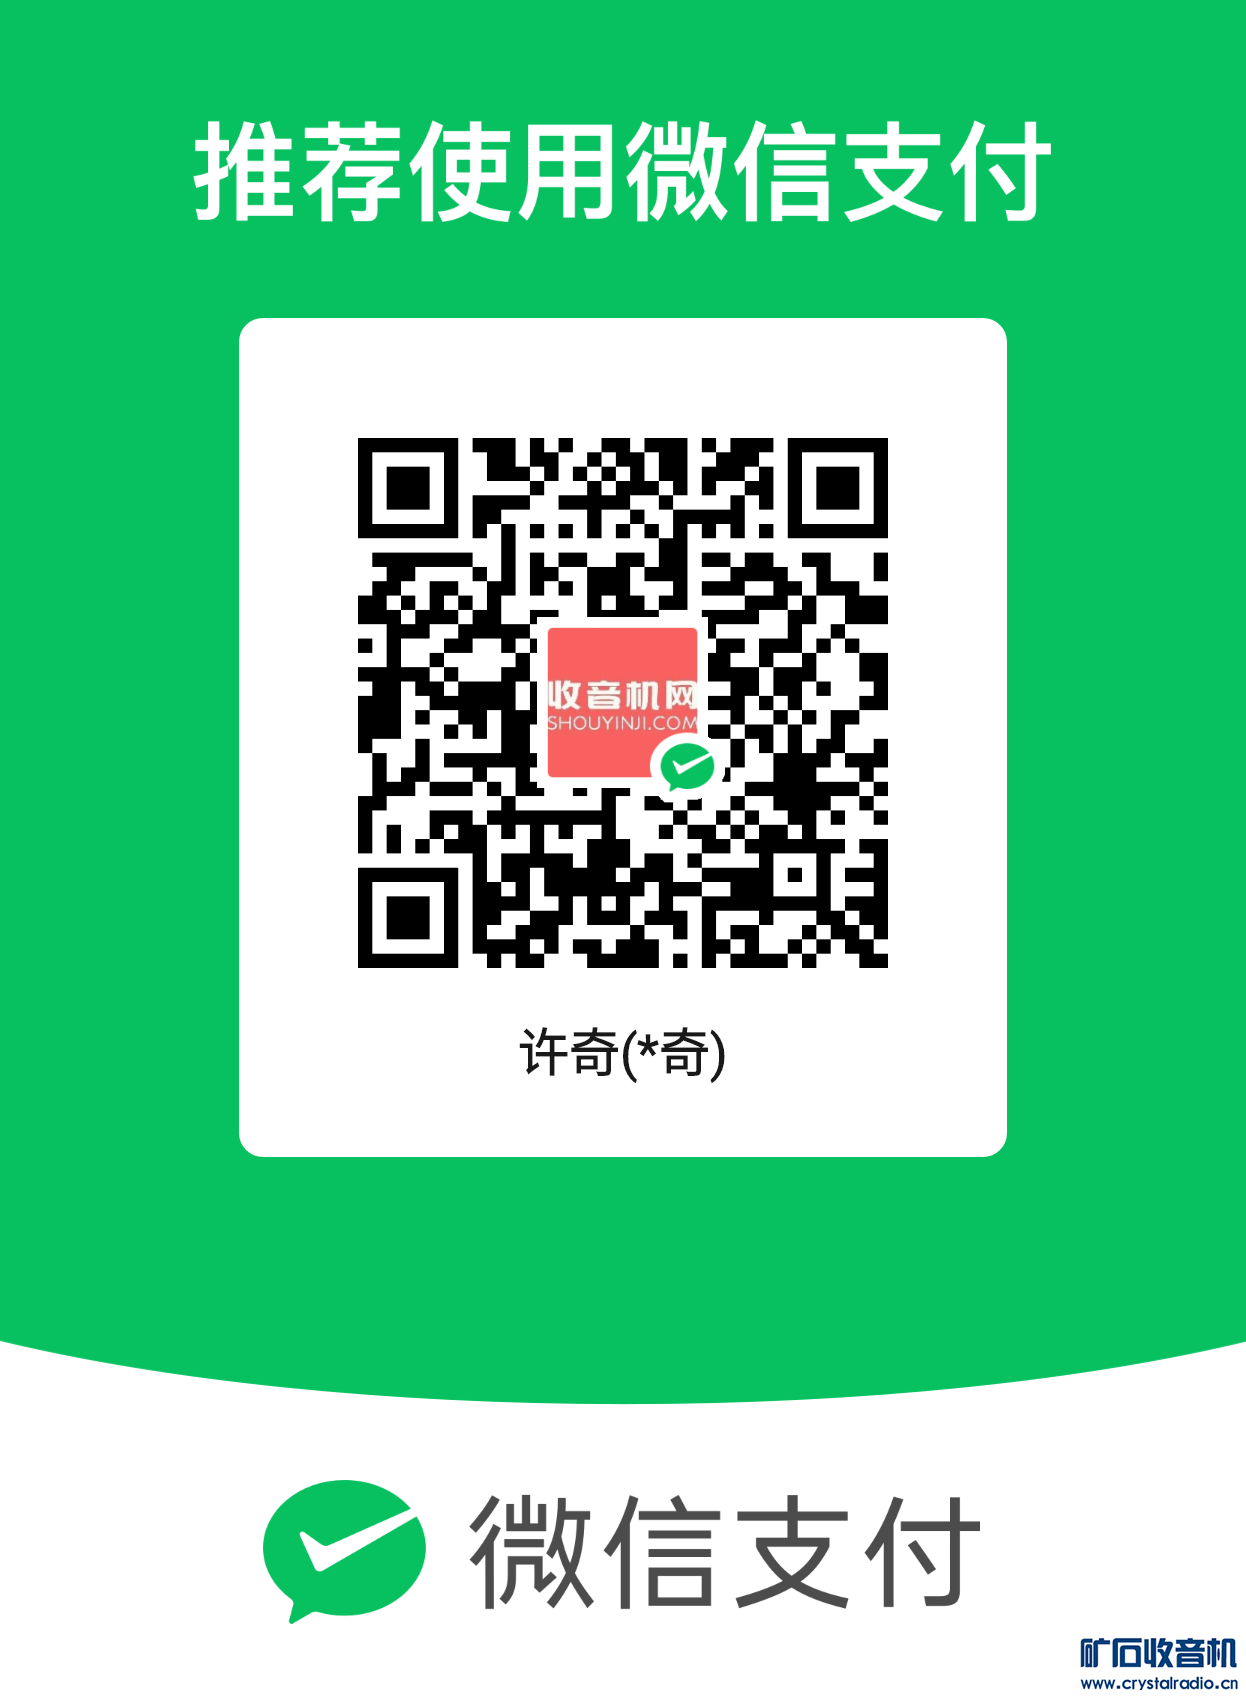 mm_facetoface_collect_qrcode_1693565329587.png